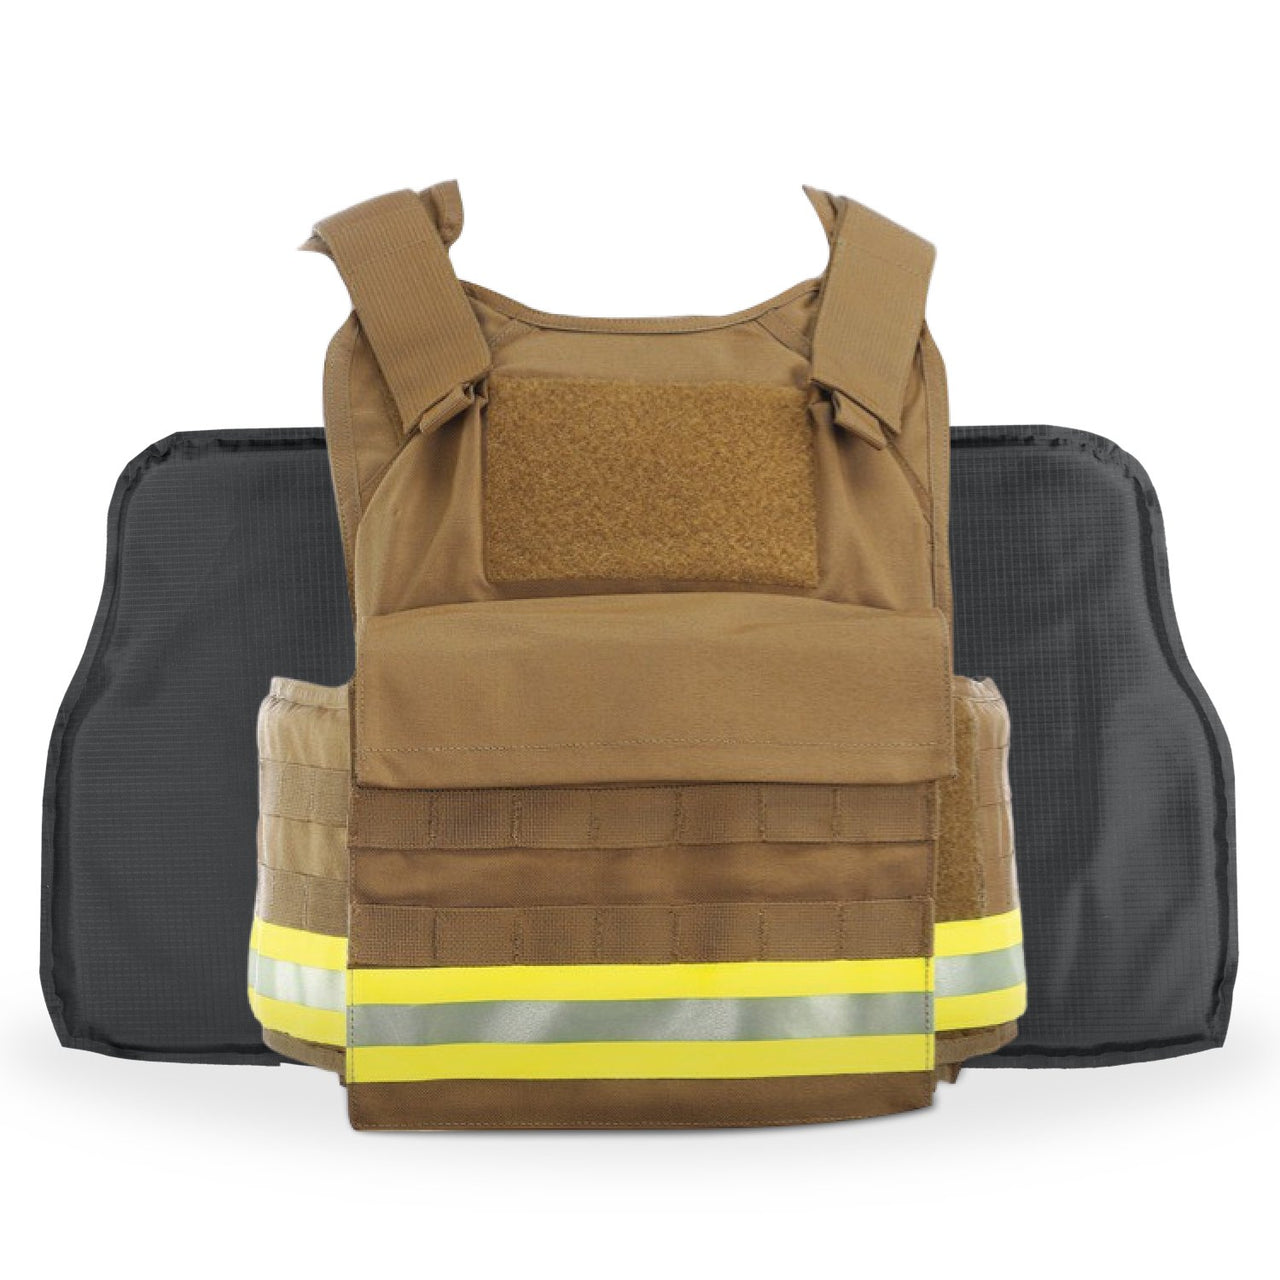 A Body Armor Direct Fire Plate Carrier Tactical Enhanced Multi-Threat Vest with a reflective stripe on it.